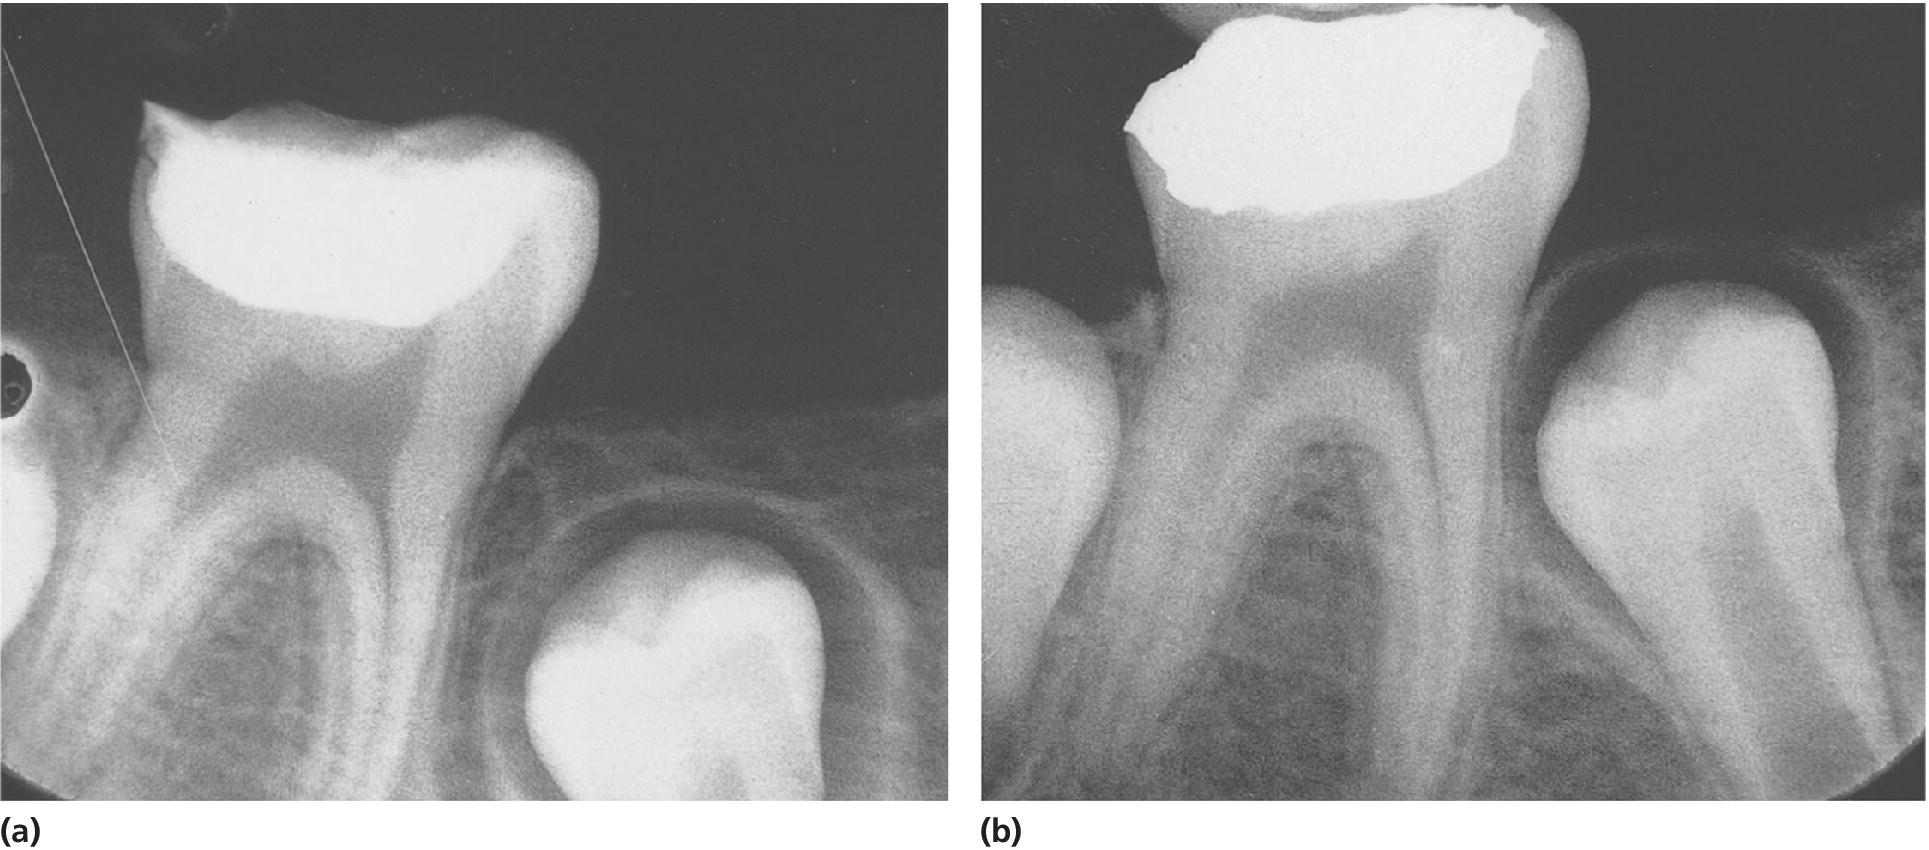 2 Radiographs of stepwise excavation of a permanent molar at the time of treatment (a) and 9 months later (b).